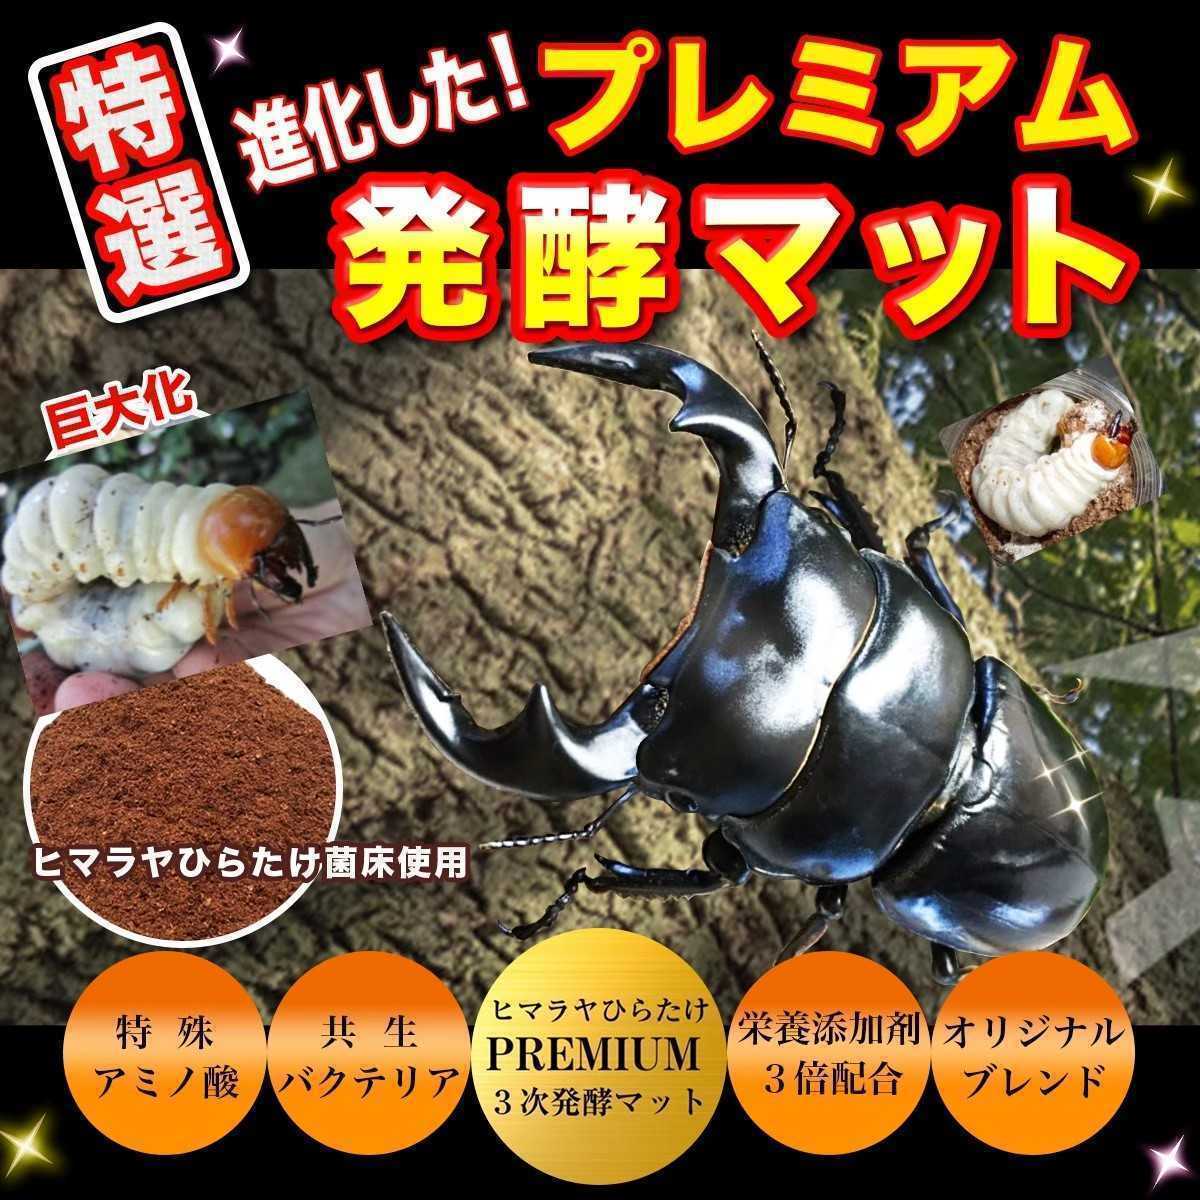  evolved! finest quality premium 3 next departure . rhinoceros beetle mat [4 sack ] special amino acid * symbiosis bacteria 3 times combination production egg also eminent. . insect ... not!